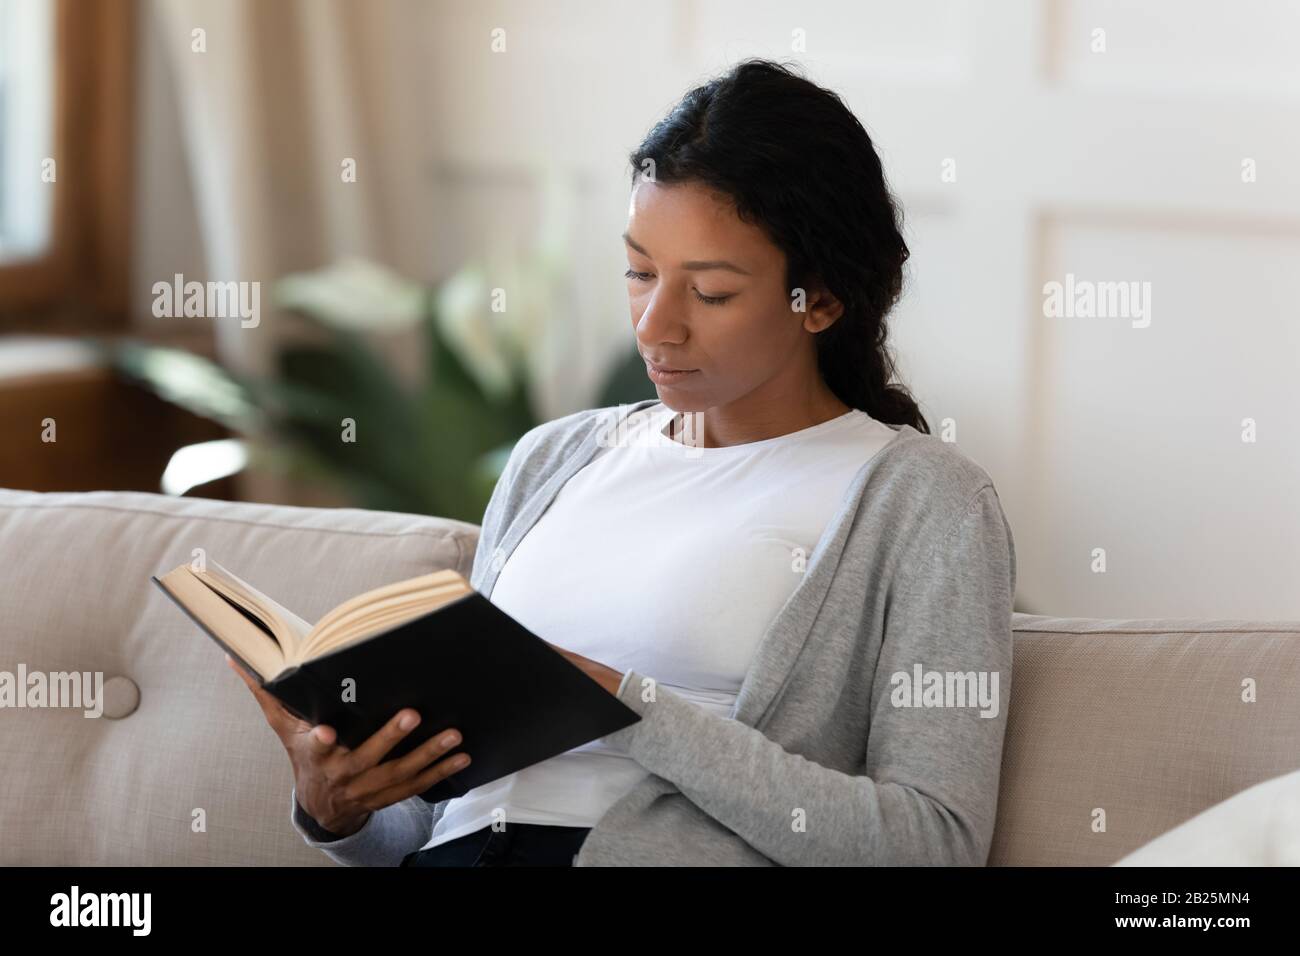 African American woman relax on couch reading book Stock Photo